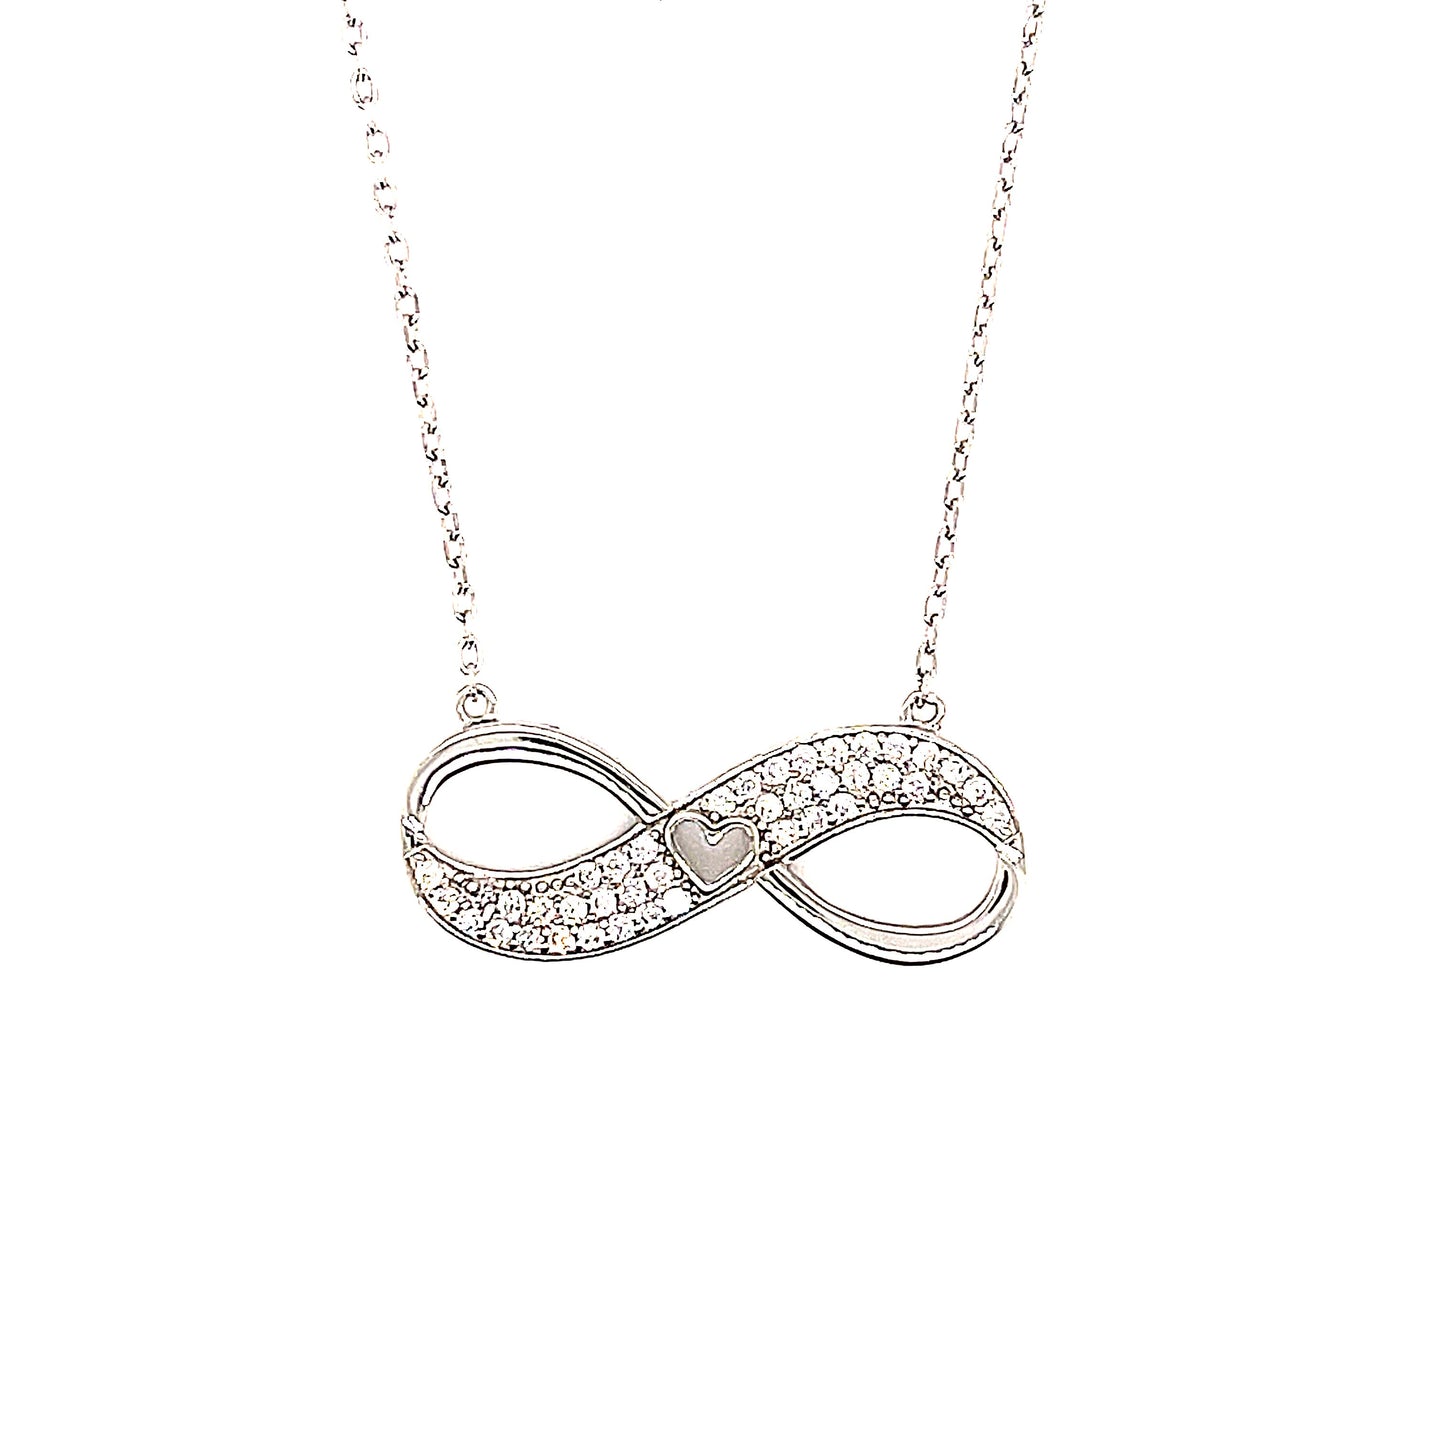 Sterling Silver Heart Infinity Pendant Necklace